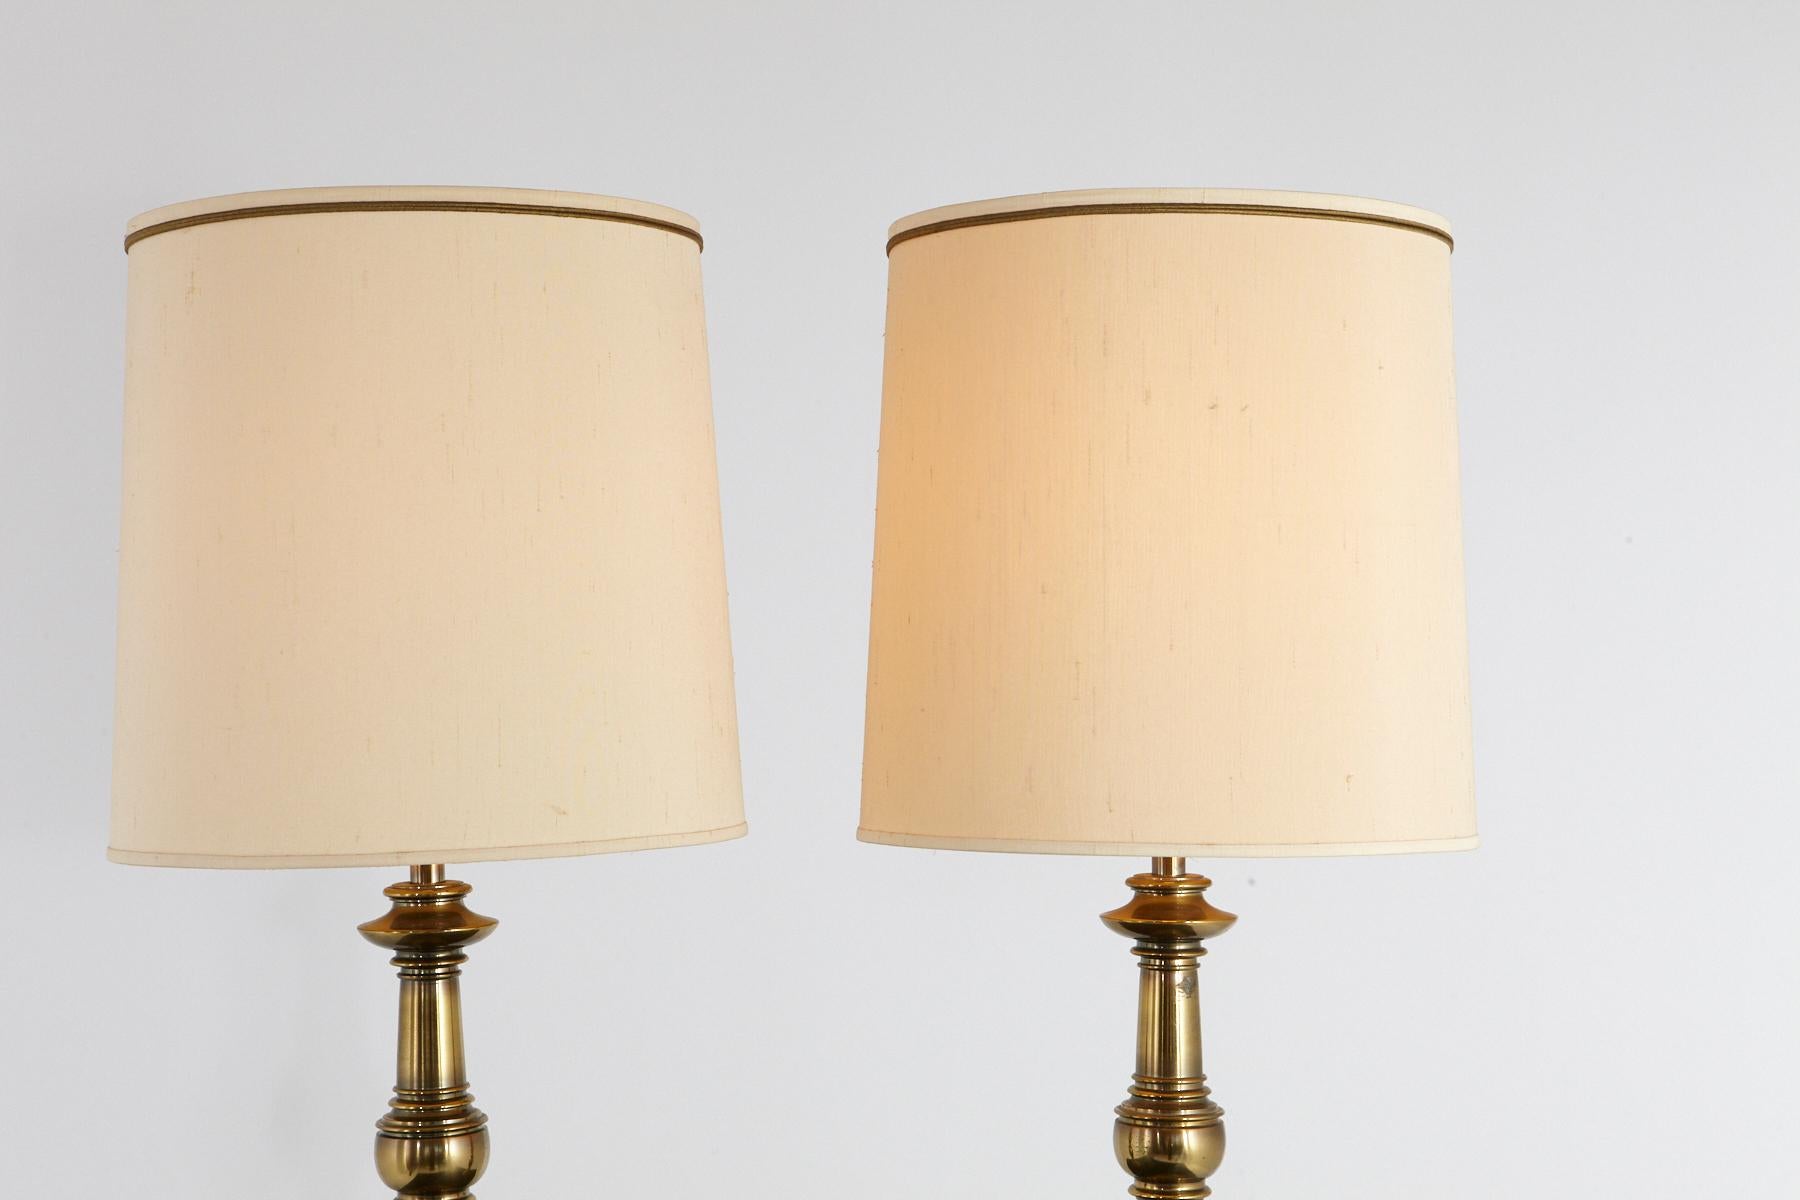 Pair of traditional Stiffel burnished brass table lamps with the original ivory colored drum shades, 
circa 1950-1960s. Very heavy, solid brass quality.
One lamp has some tarnish on the base, both lamps have a natural brass patina, 
which can